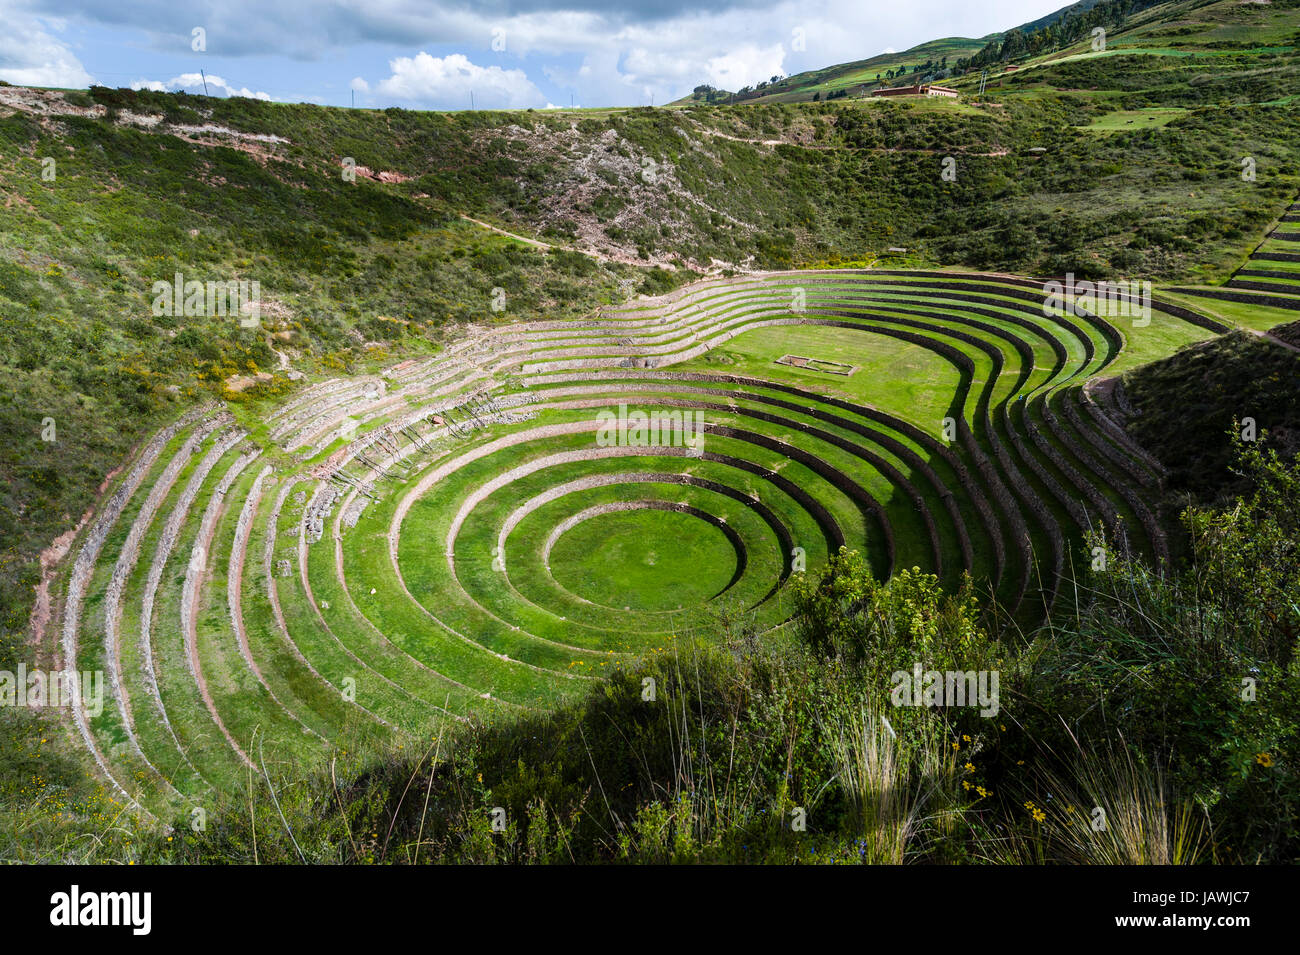 An Inca site with stone wall terraces for growing agricultural crops by creating microclimates. Stock Photo